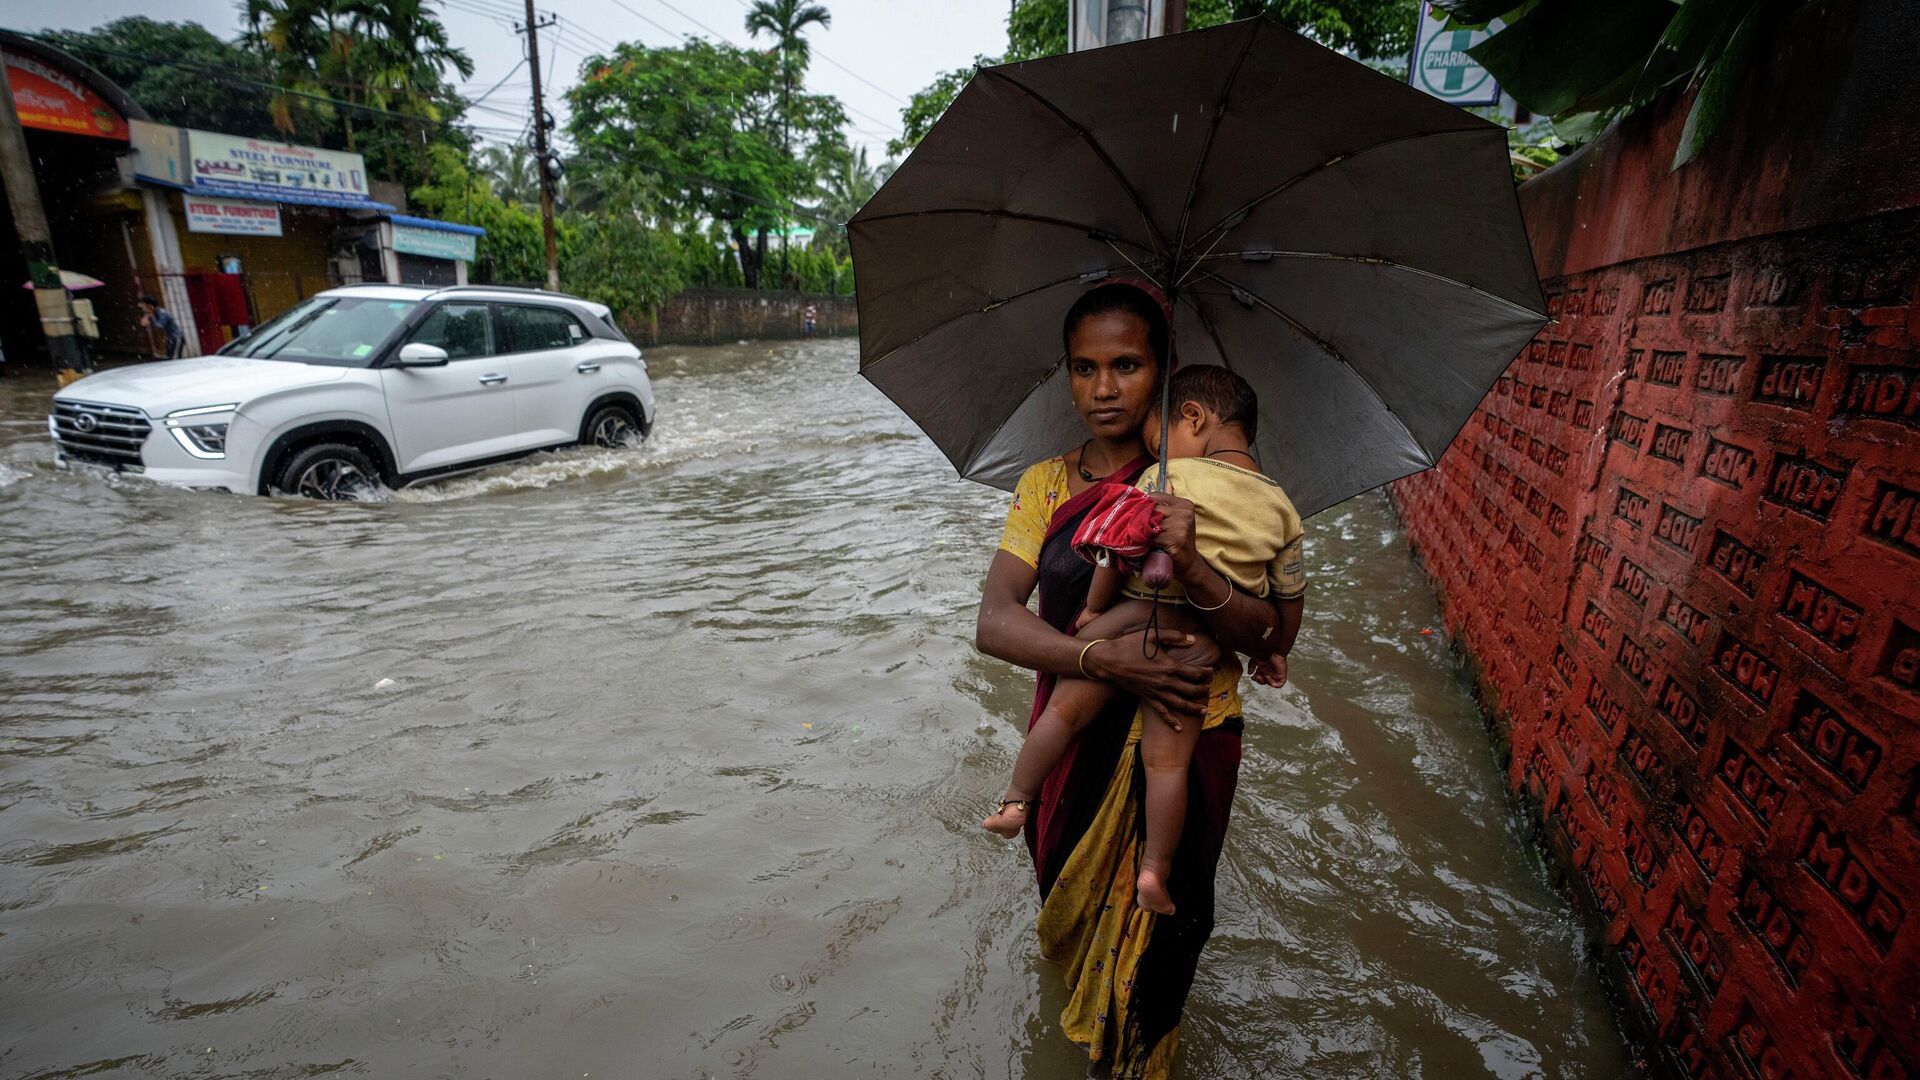 A woman carries a child and wades through a flooded street during heavy rainfall in Gauhati, India, Thursday, June 16, 2022 - Sputnik International, 1920, 20.06.2022